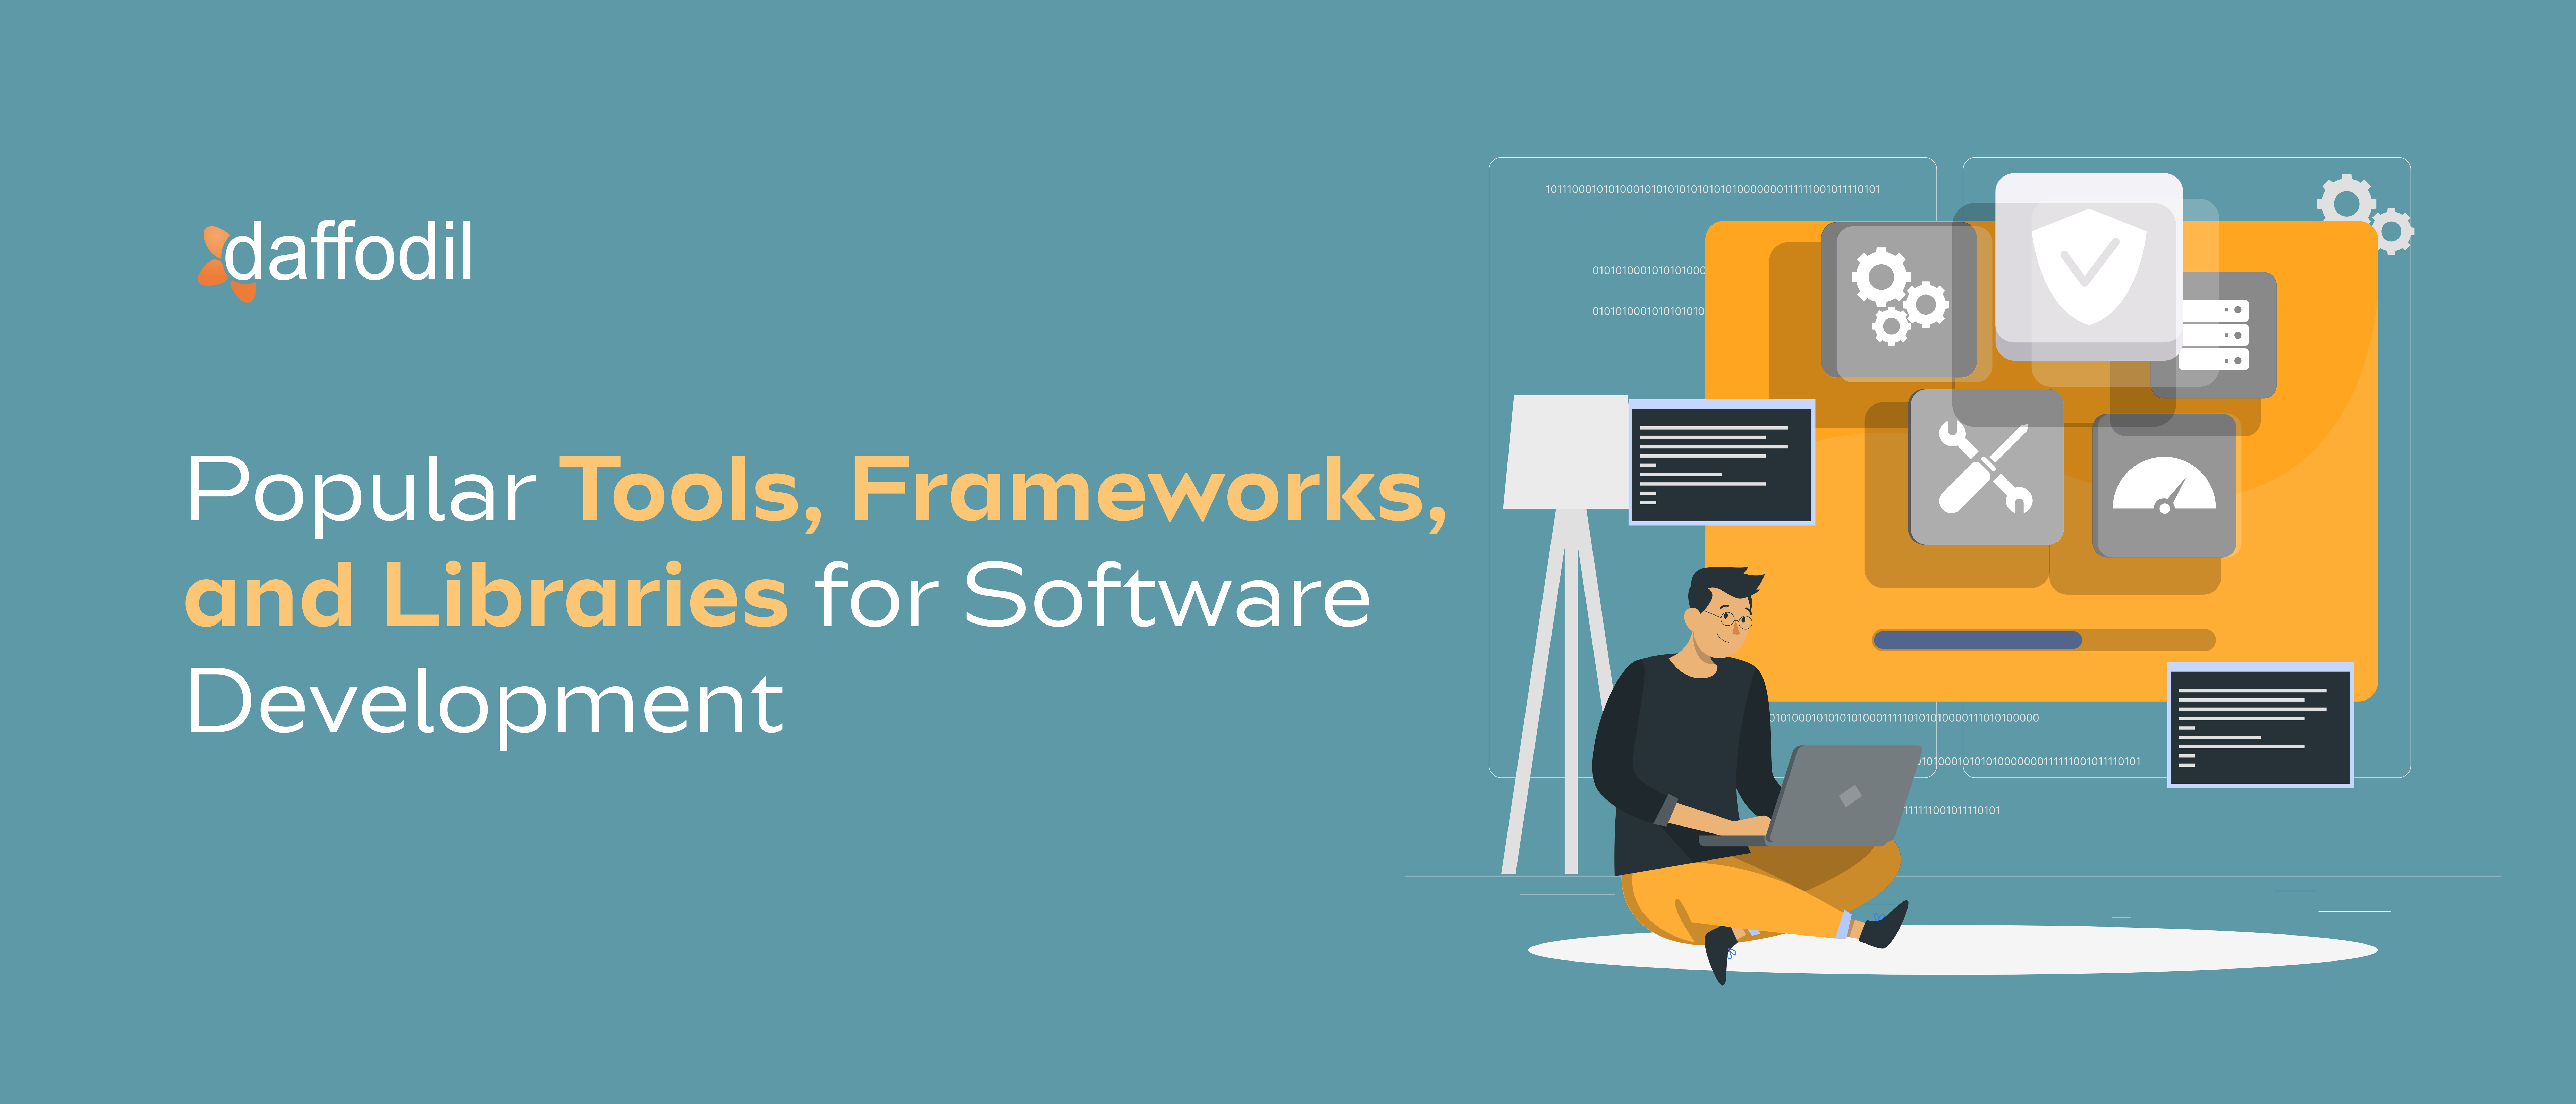 Top 20 Tools, Frameworks, and Libraries for Software Development